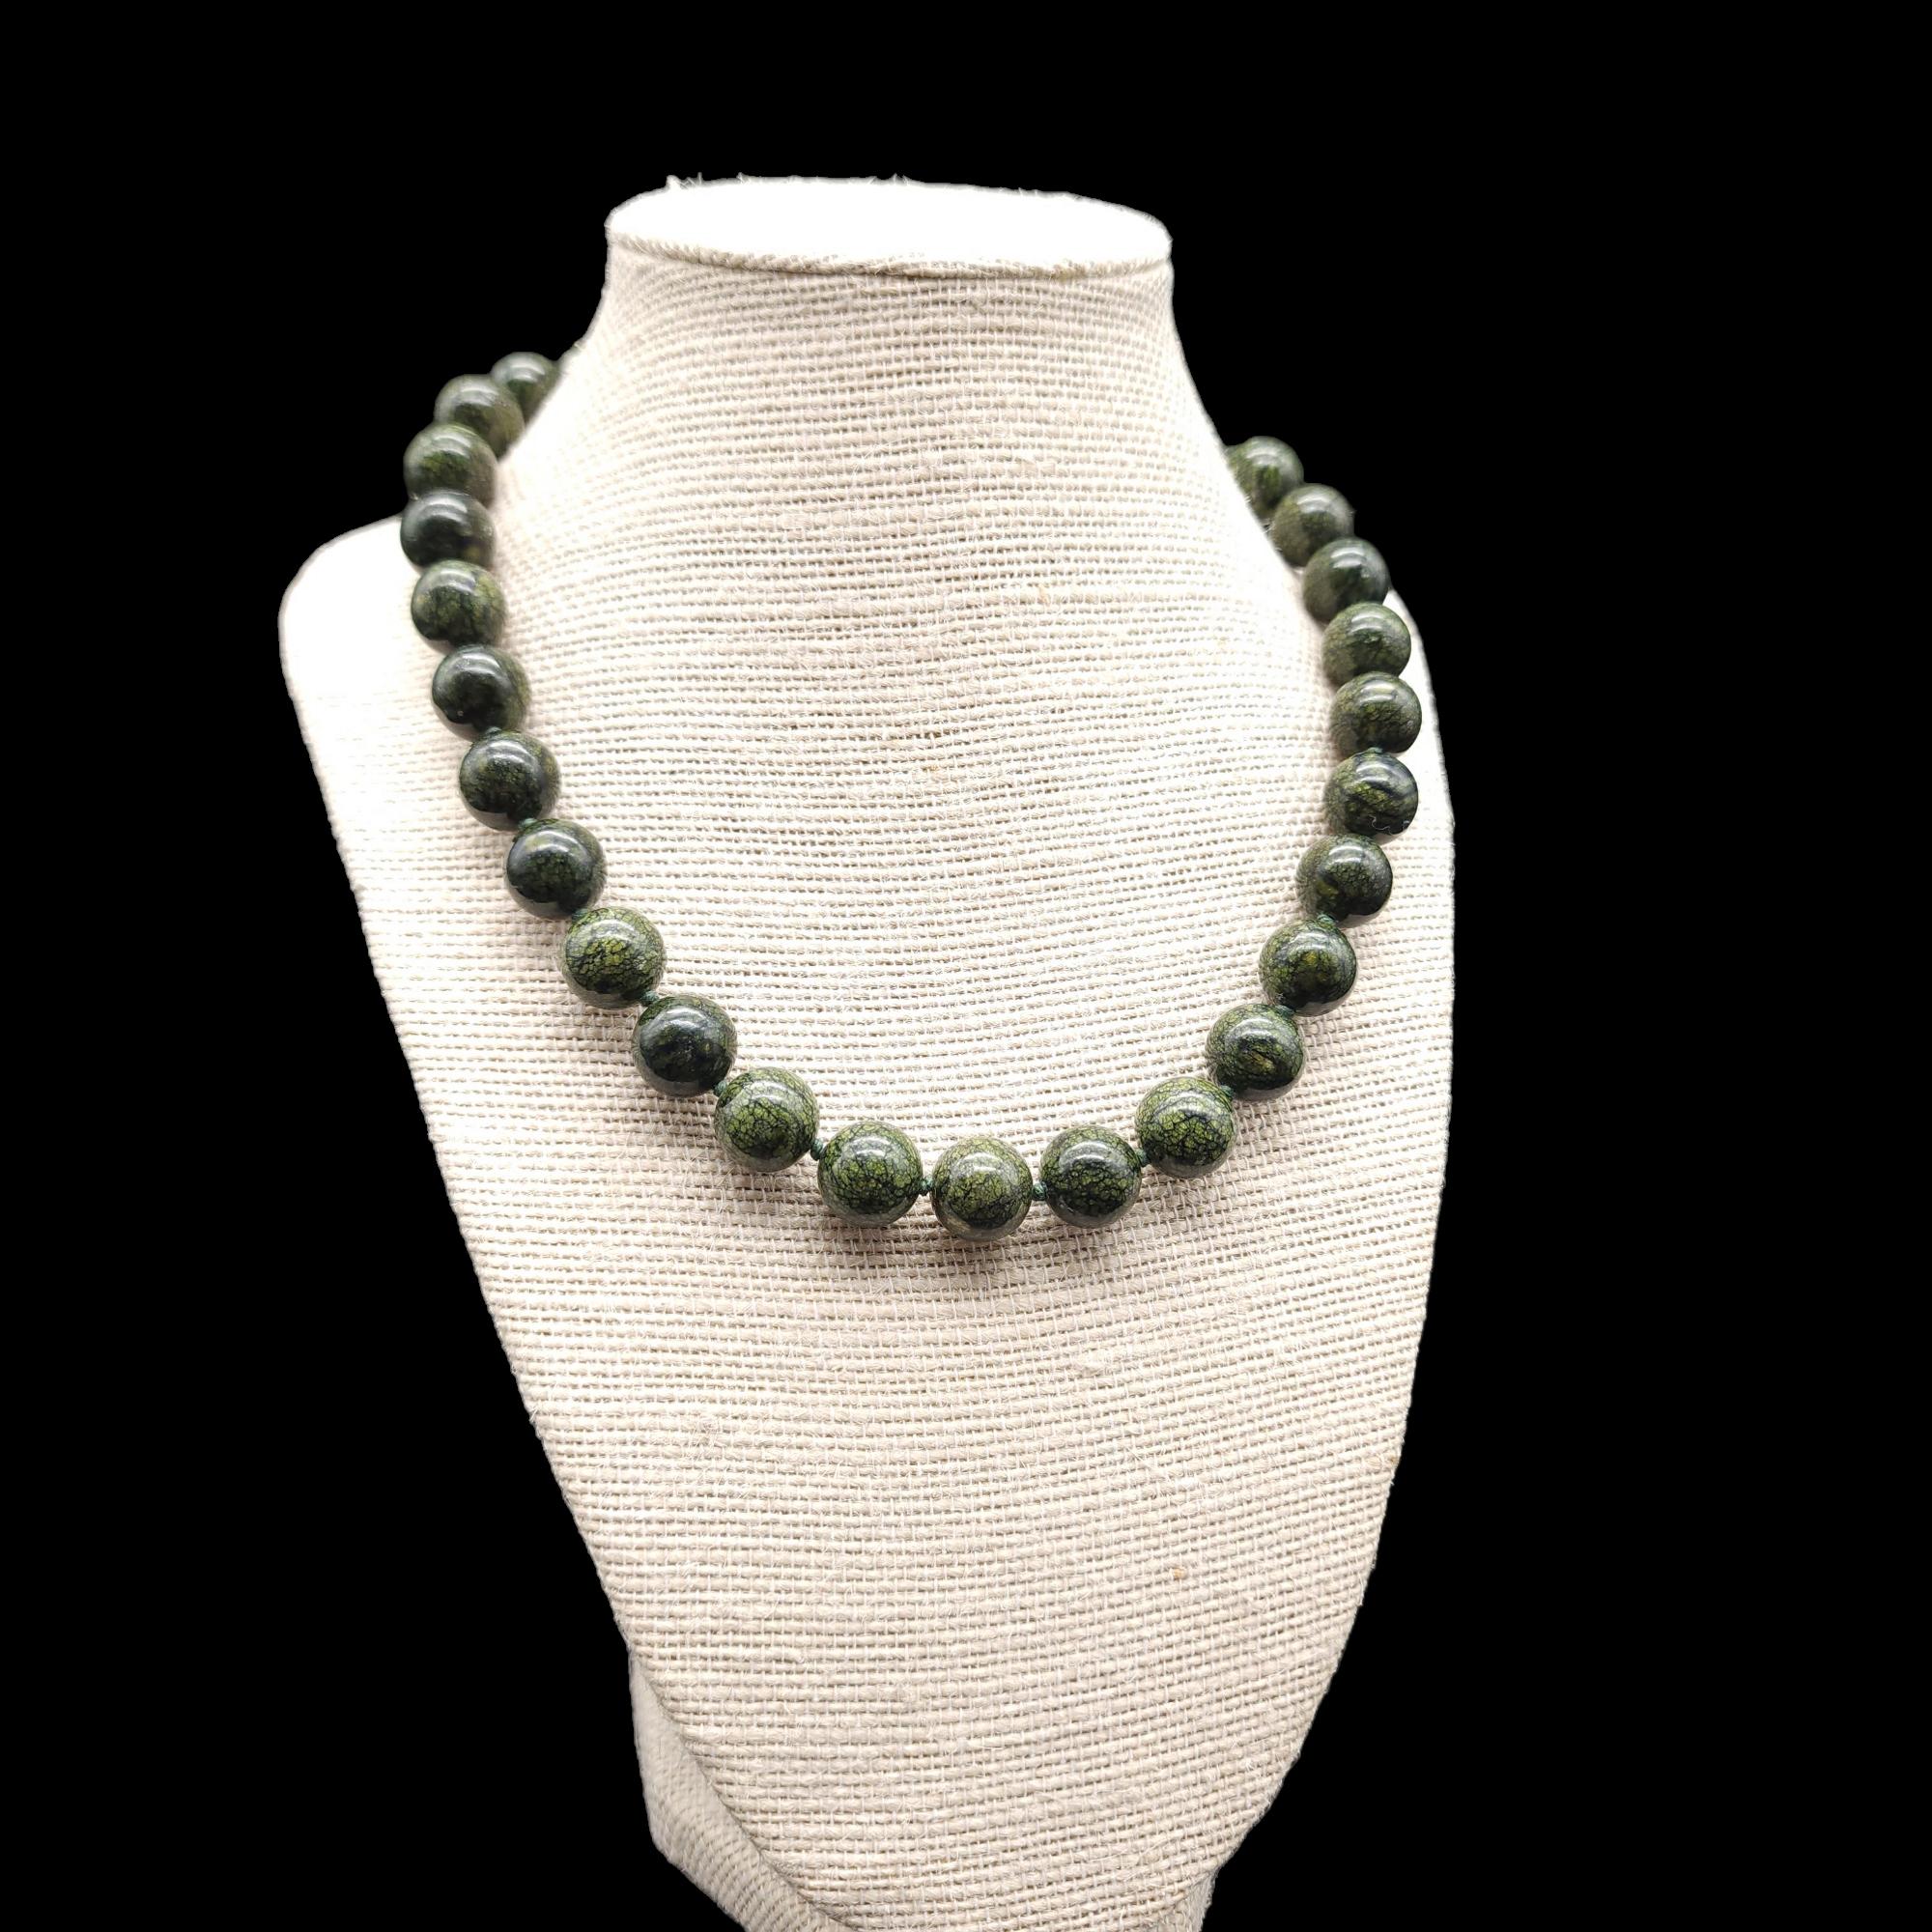 This Polished Jade Bead Necklace is a stunning piece of vintage jewelry that is sure to turn heads! The necklace features dark green jade beads that have been polished to a high shine, giving them a beautiful luster. The beads are strung together on